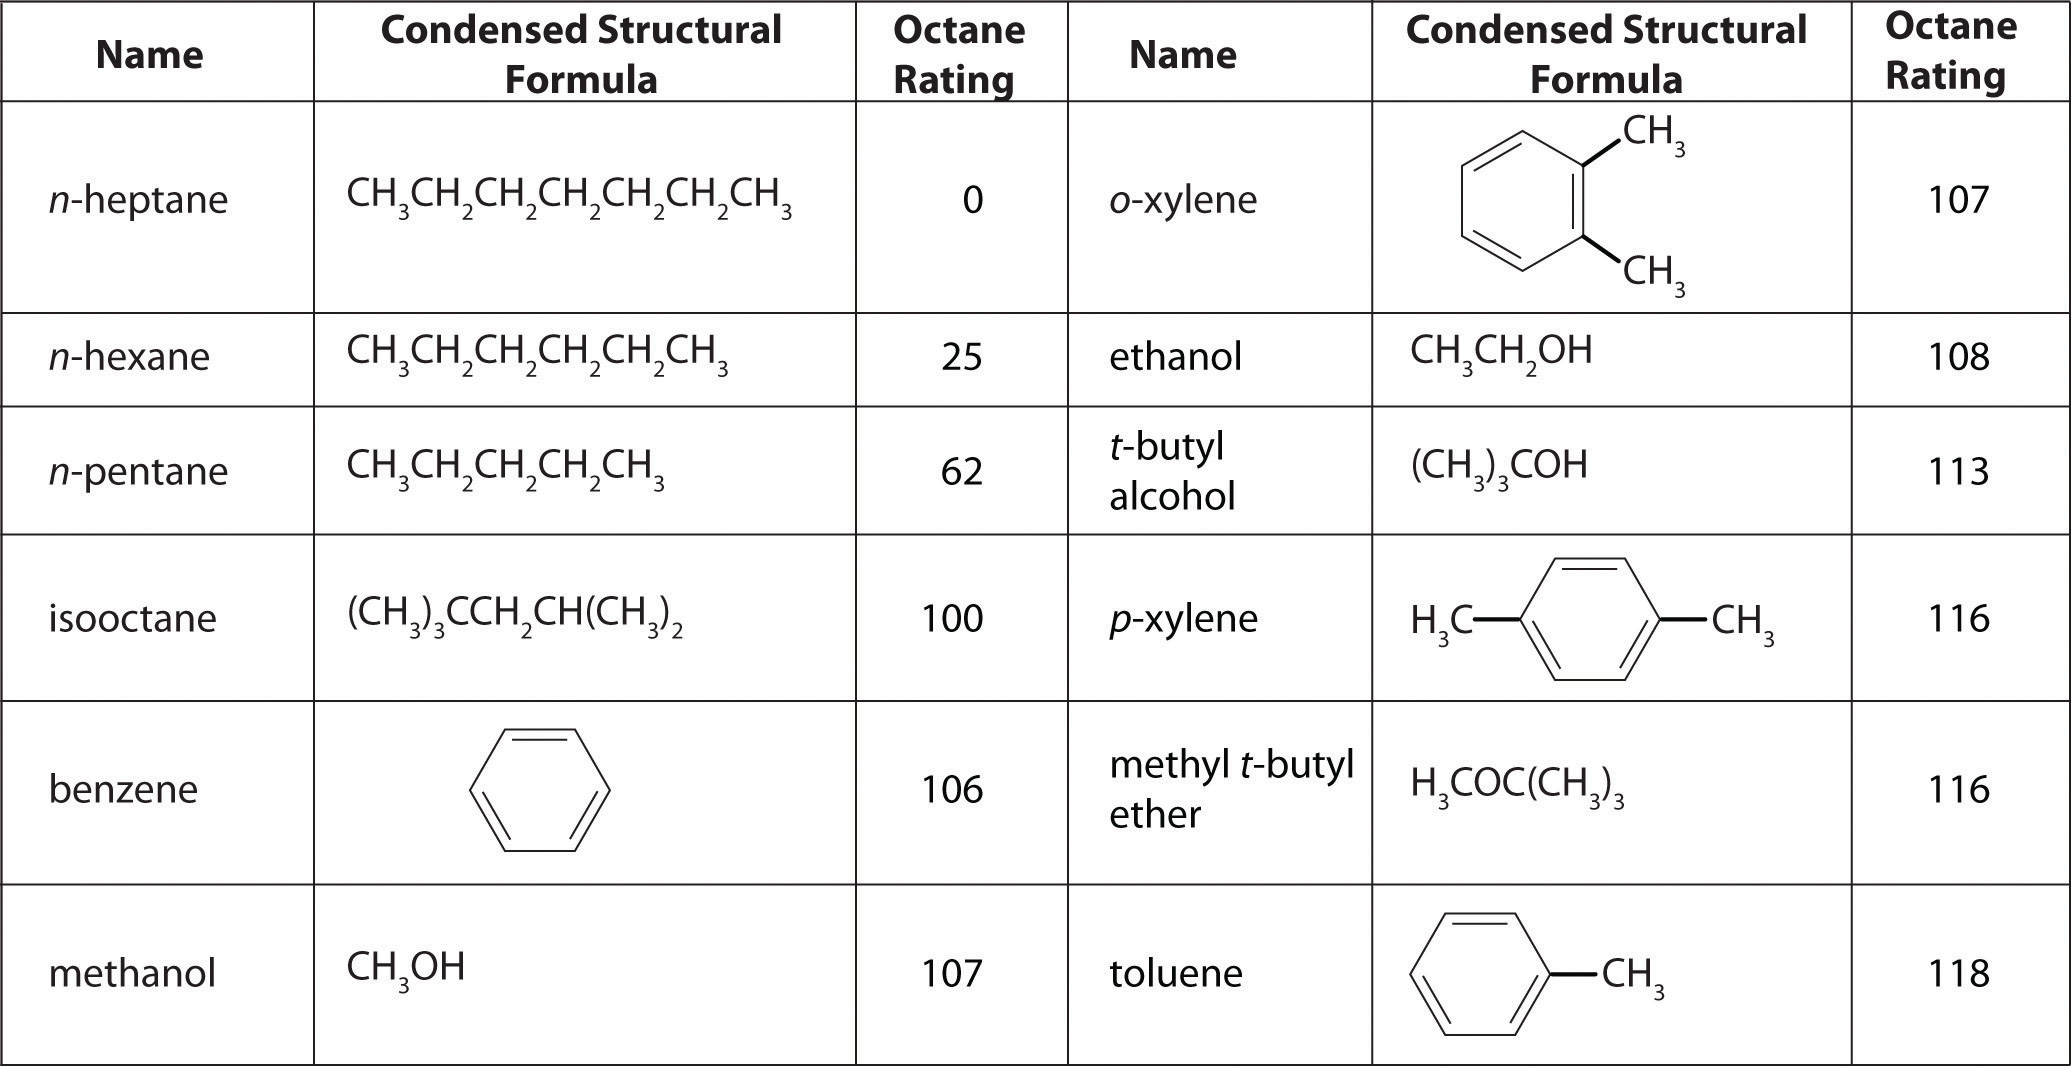 N-heptane has a condensed structural formula of CH3CH2CH2CH2CH2CH2CH3 and an octane rating of 0. N-hexane has a condensed structural formula of CH3CH2CH2CH2CH2CH3 and an octane rating of 25. N-pentane has a condensed structural formula of CH3CH2CH2CH2CH3 and an octane rating of 62. Isooctane has a condensed structural formula of (CH3)3CCH2CH(CH3)2 and an octane rating of 100. 